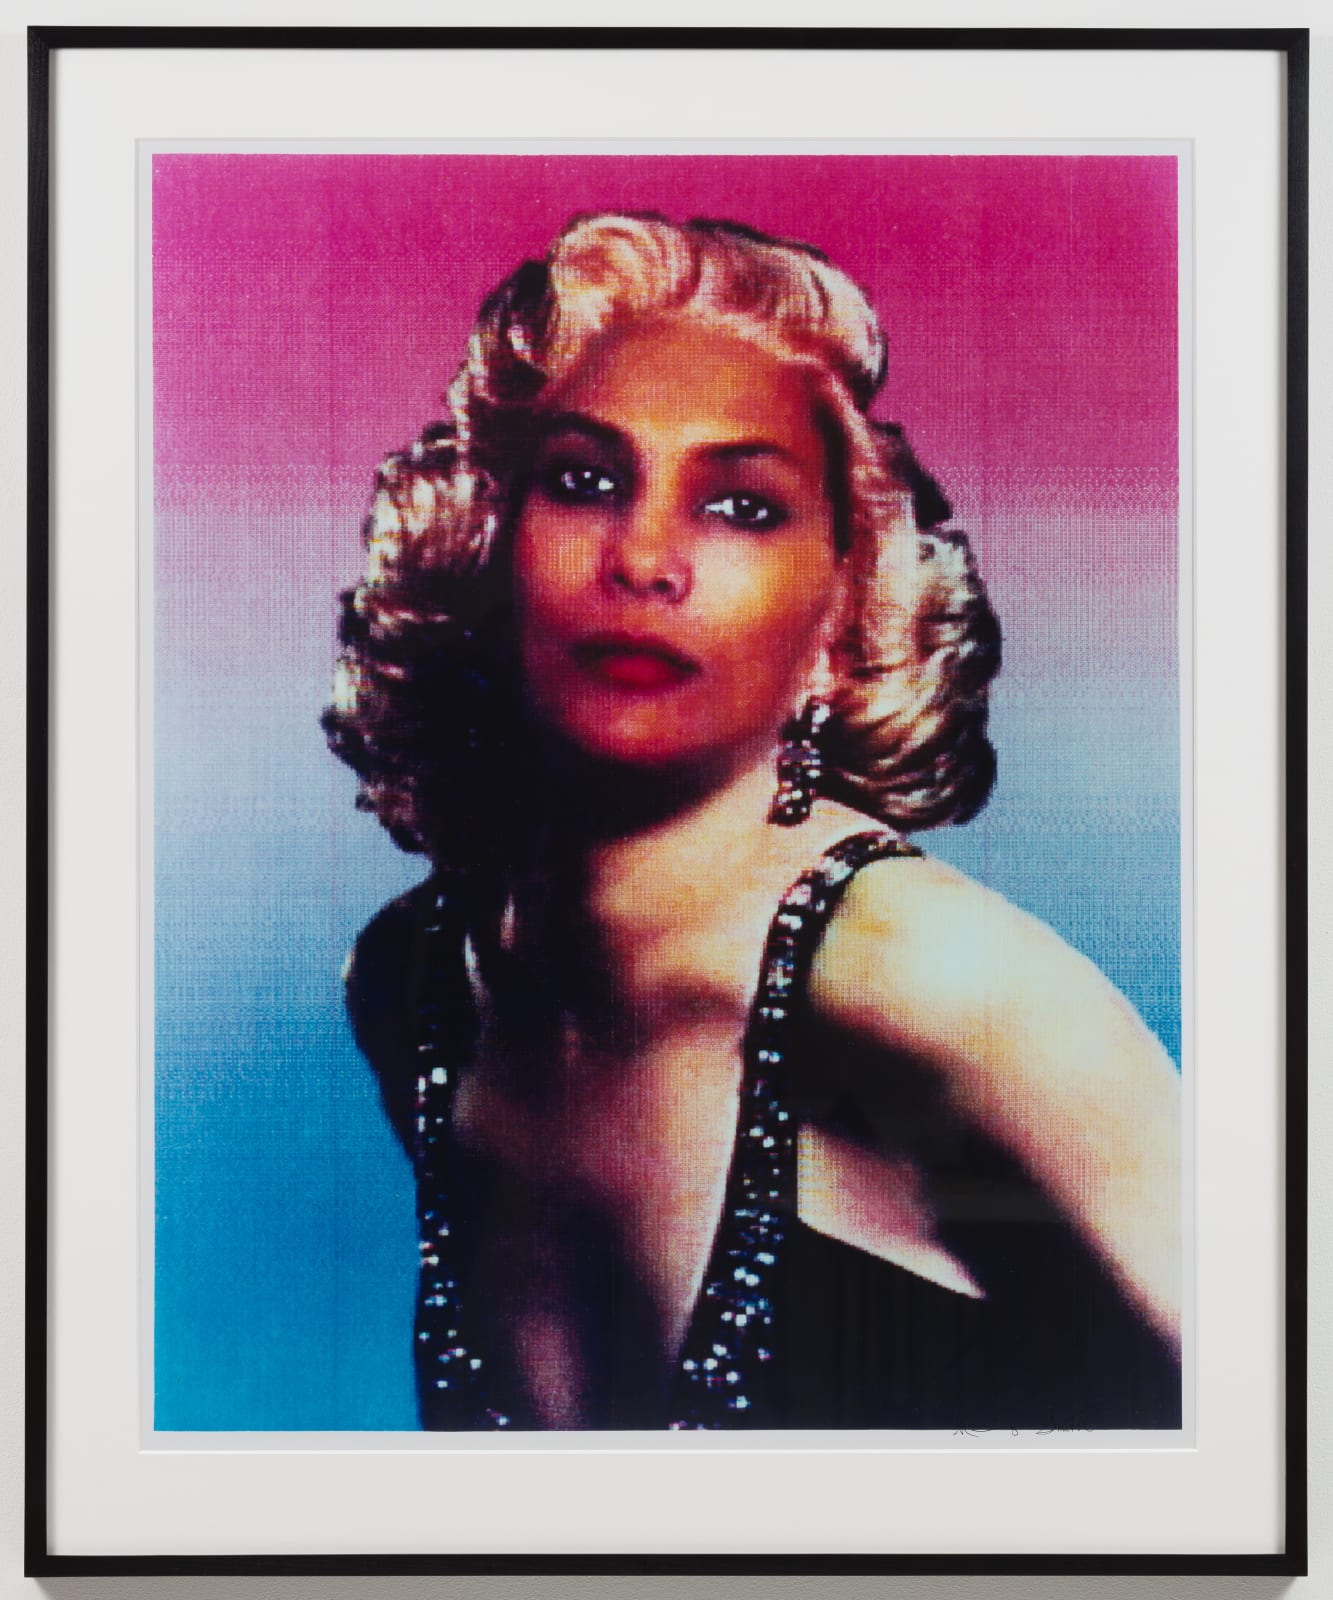 Ming Smith, Me as Marilyn, 1991